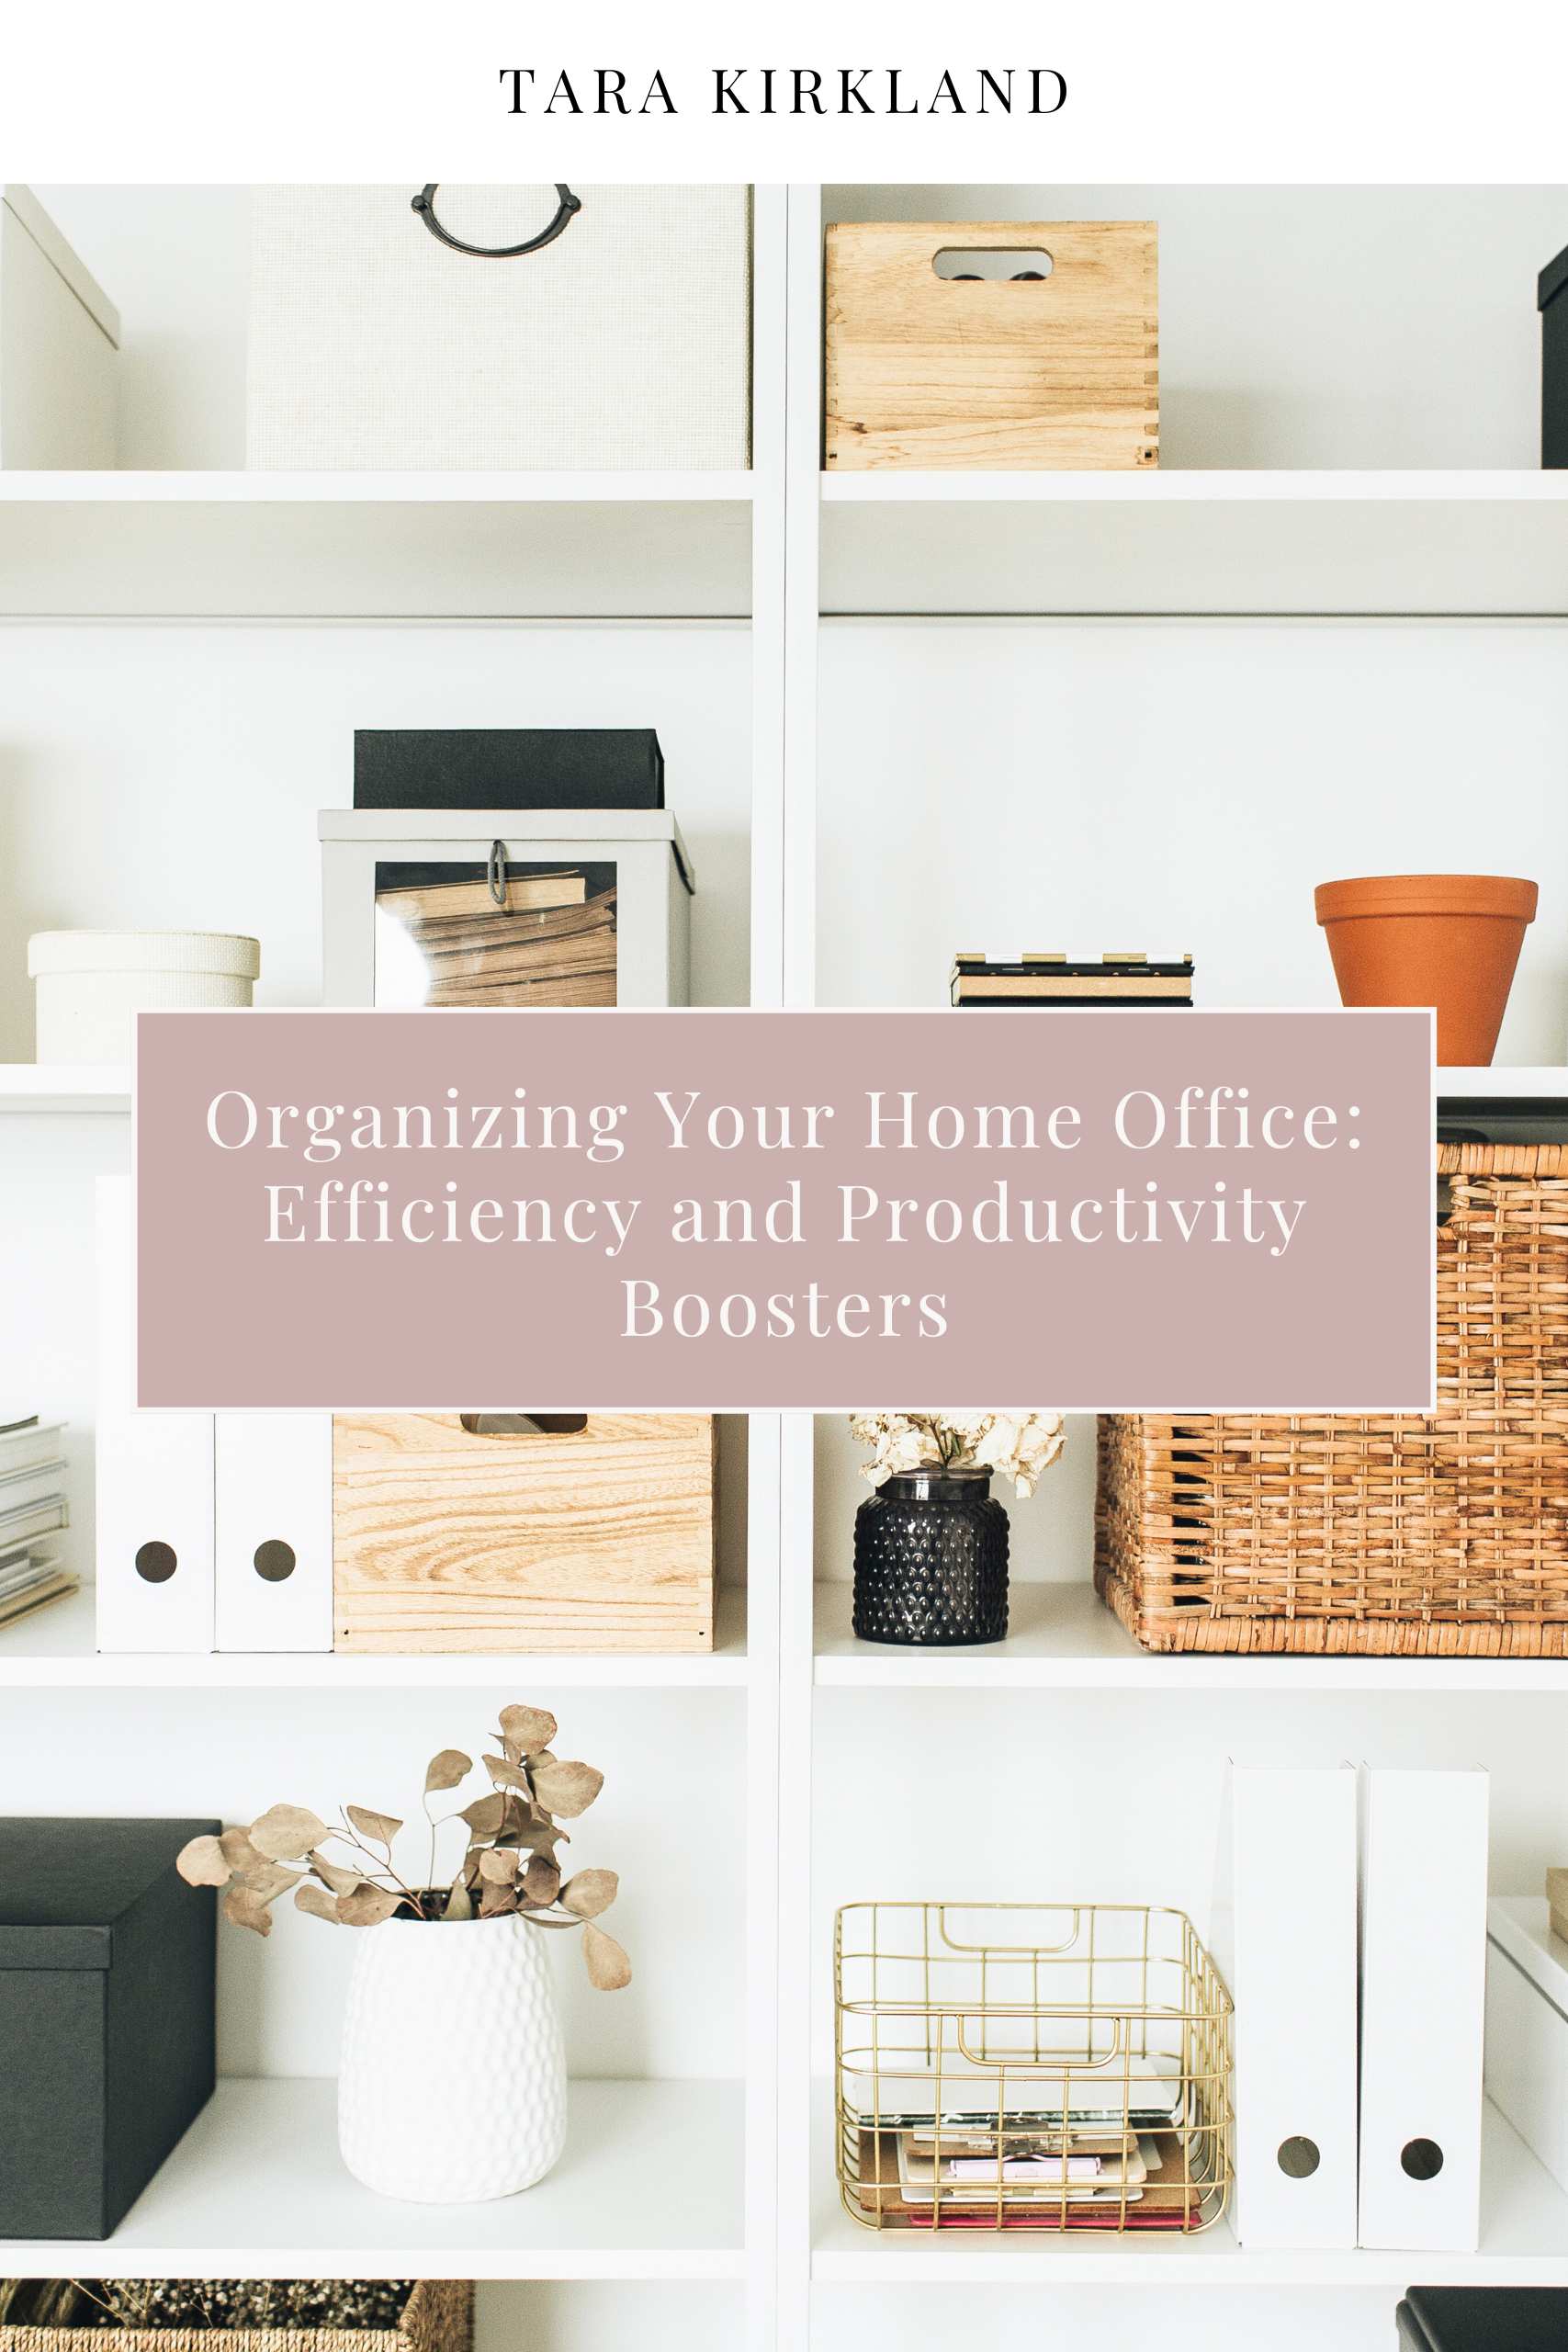 Organizing Your Home Office: Efficiency and Productivity Boosters